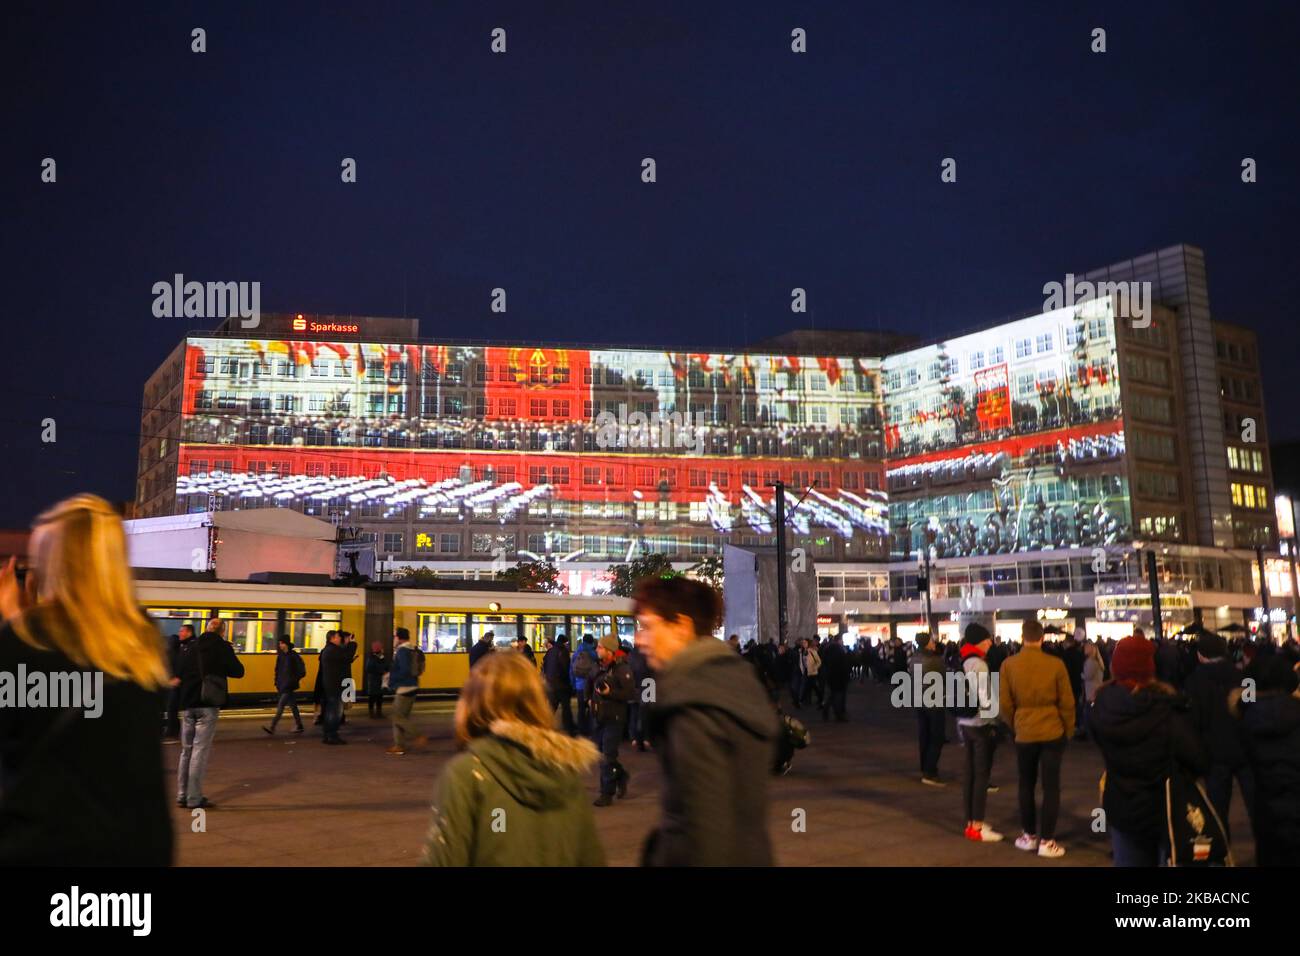 Historic pictures and quotes are projected on the buildings at Alexanderplatz for the upcoming 30th anniversary of the fall of the Berlin Wall. Berlin, Germany on 8 November, 2019. (Photo by Beata Zawrzel/NurPhoto) Stock Photo